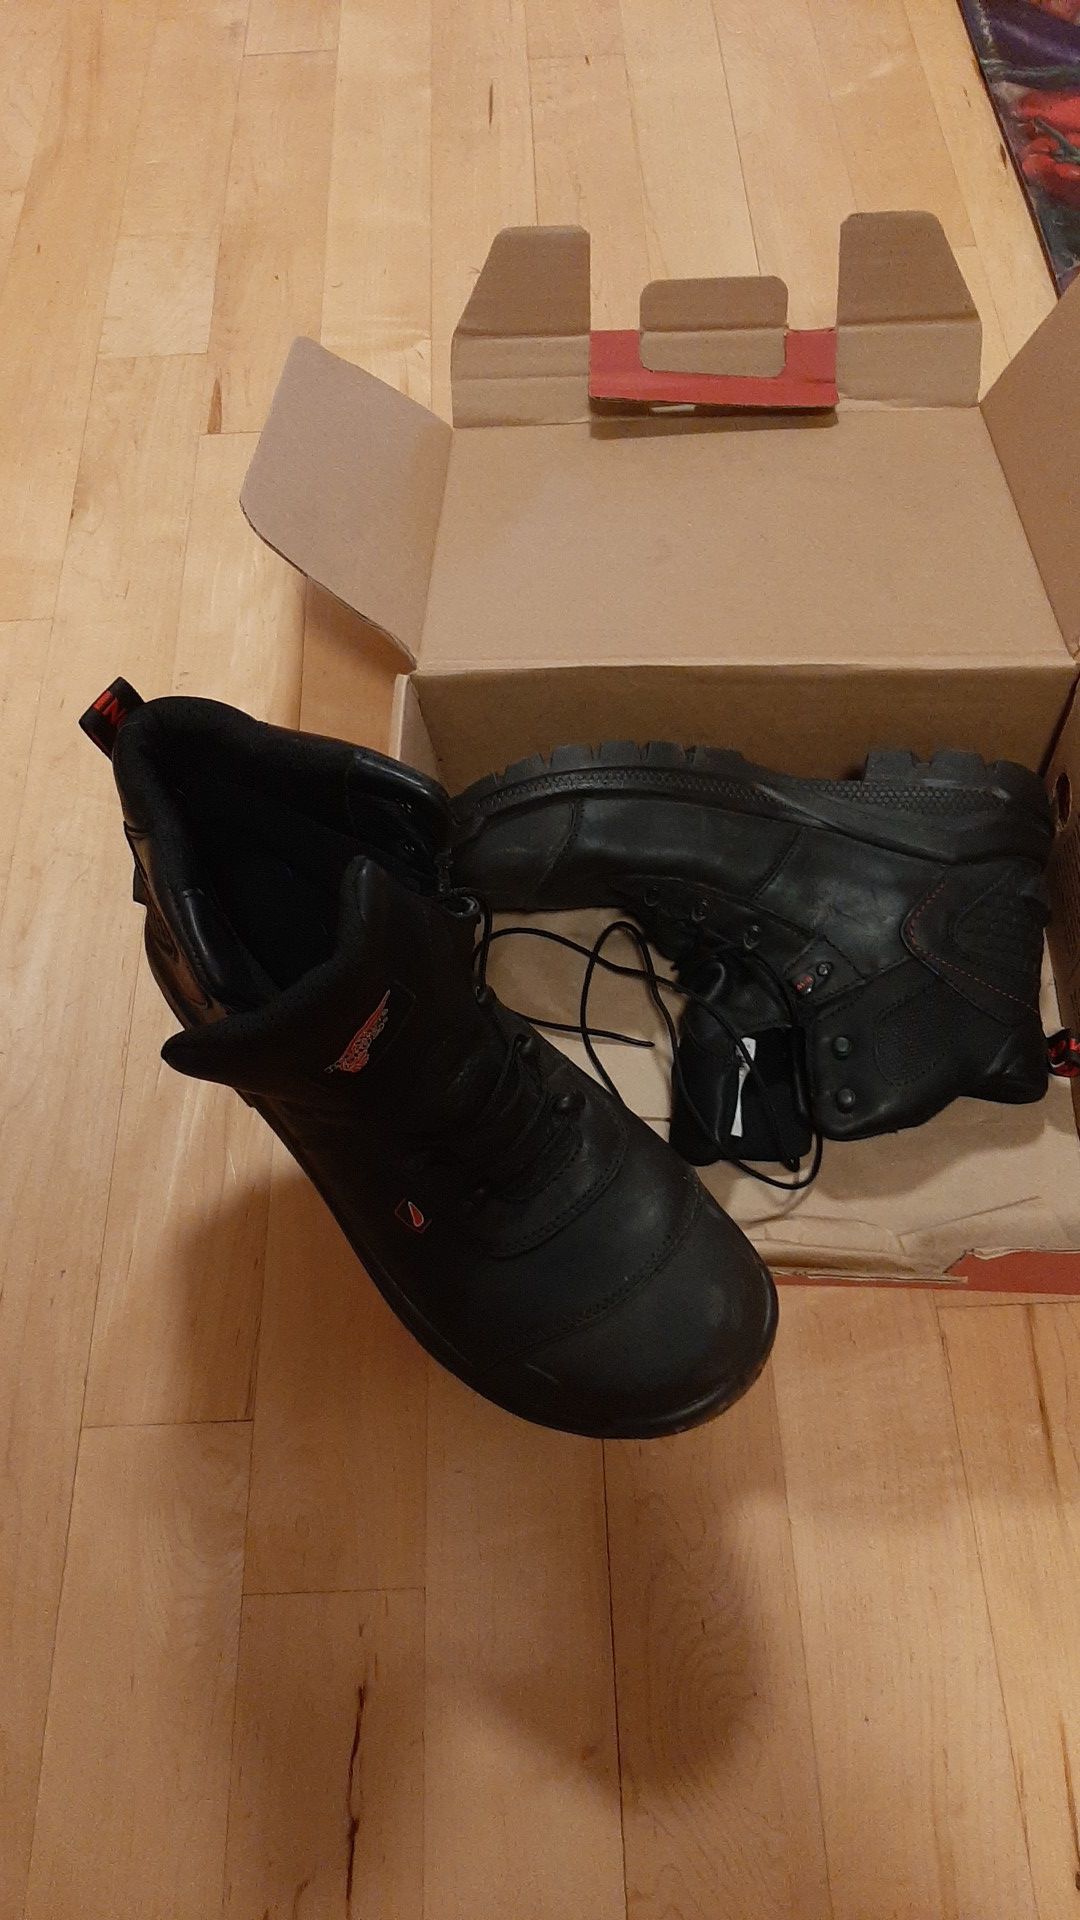 Red wing size 12 aluminum toe work boot